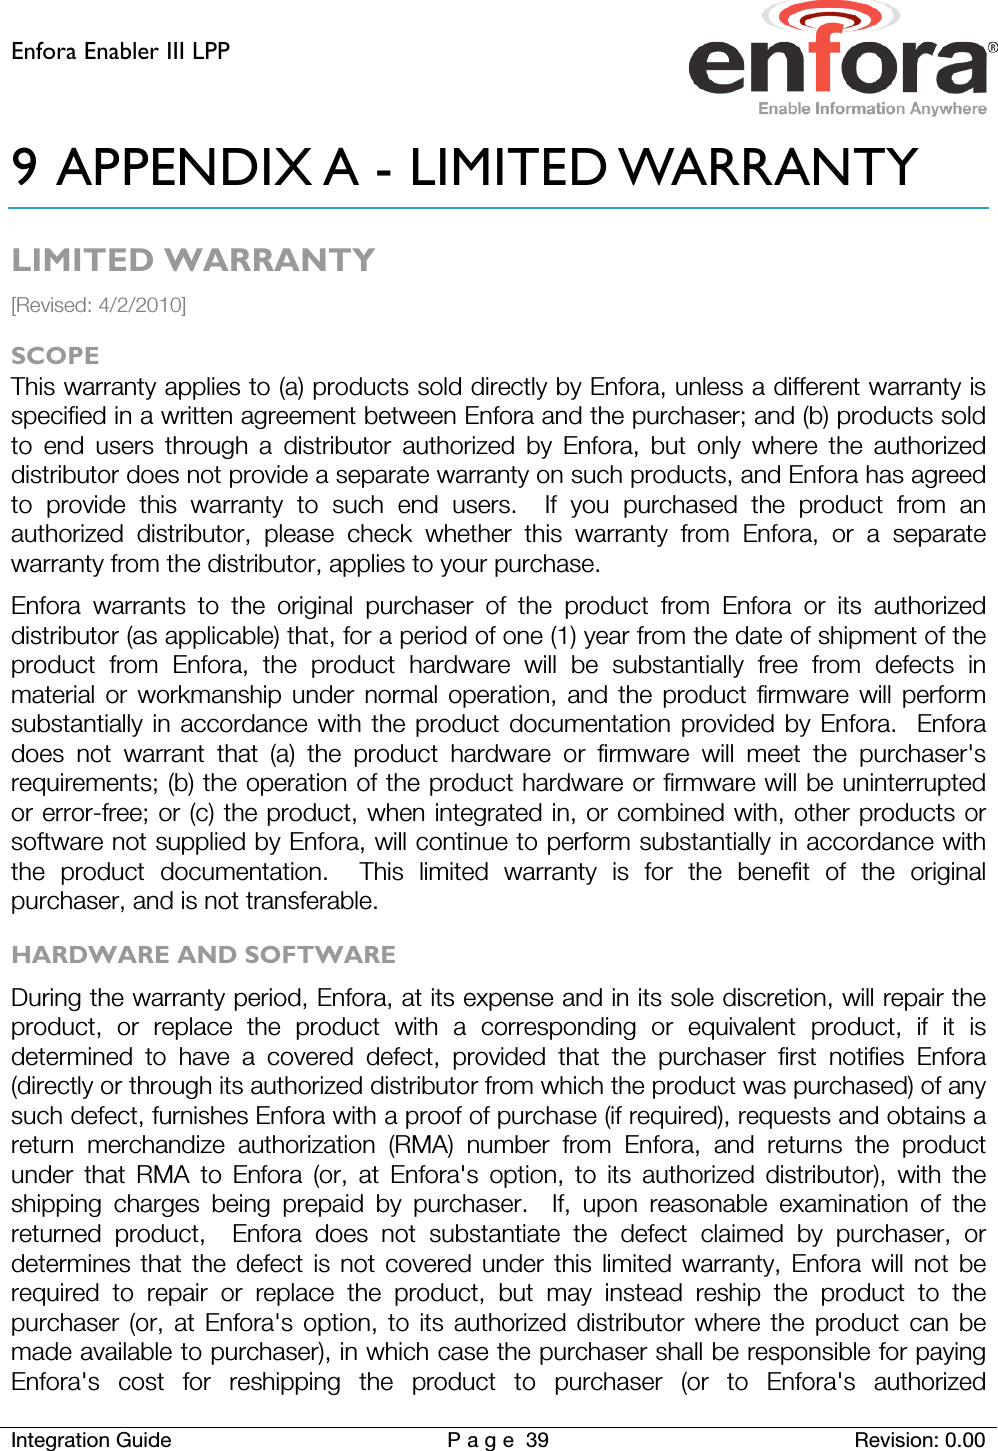 Enfora Enabler III LPP    Integration Guide Page 39 Revision: 0.00  9 APPENDIX A - LIMITED WARRANTY LIMITED WARRANTY [Revised: 4/2/2010] SCOPE This warranty applies to (a) products sold directly by Enfora, unless a different warranty is specified in a written agreement between Enfora and the purchaser; and (b) products sold to end users through a distributor authorized by Enfora, but only where the authorized distributor does not provide a separate warranty on such products, and Enfora has agreed to provide this warranty to such end users.  If you purchased the product from an authorized distributor, please check whether this warranty from Enfora, or a separate warranty from the distributor, applies to your purchase. Enfora warrants to the original purchaser of the product from Enfora or its authorized distributor (as applicable) that, for a period of one (1) year from the date of shipment of the product from Enfora, the product hardware will be substantially free from defects in material or workmanship under normal operation, and the product firmware will perform substantially in accordance with the product documentation provided by Enfora.  Enfora does not warrant that (a) the product hardware or firmware will meet the purchaser&apos;s requirements; (b) the operation of the product hardware or firmware will be uninterrupted or error-free; or (c) the product, when integrated in, or combined with, other products or software not supplied by Enfora, will continue to perform substantially in accordance with the product documentation.  This limited warranty is for the benefit of the original purchaser, and is not transferable. HARDWARE AND SOFTWARE During the warranty period, Enfora, at its expense and in its sole discretion, will repair the product, or replace the product with a corresponding or equivalent product, if it is determined to have a covered defect, provided that the purchaser first notifies Enfora (directly or through its authorized distributor from which the product was purchased) of any such defect, furnishes Enfora with a proof of purchase (if required), requests and obtains a return merchandize authorization (RMA) number from Enfora, and returns the product under that RMA to Enfora (or, at Enfora&apos;s option, to its authorized distributor), with the shipping charges being prepaid by purchaser.  If, upon reasonable examination of the returned product,  Enfora does not substantiate the defect claimed by purchaser, or determines that the defect is not covered under this limited warranty, Enfora will not be required to repair or replace the product, but may instead reship the product to the purchaser (or, at Enfora&apos;s option, to its authorized distributor where the product can be made available to purchaser), in which case the purchaser shall be responsible for paying Enfora&apos;s cost for reshipping the product to purchaser (or to Enfora&apos;s authorized 